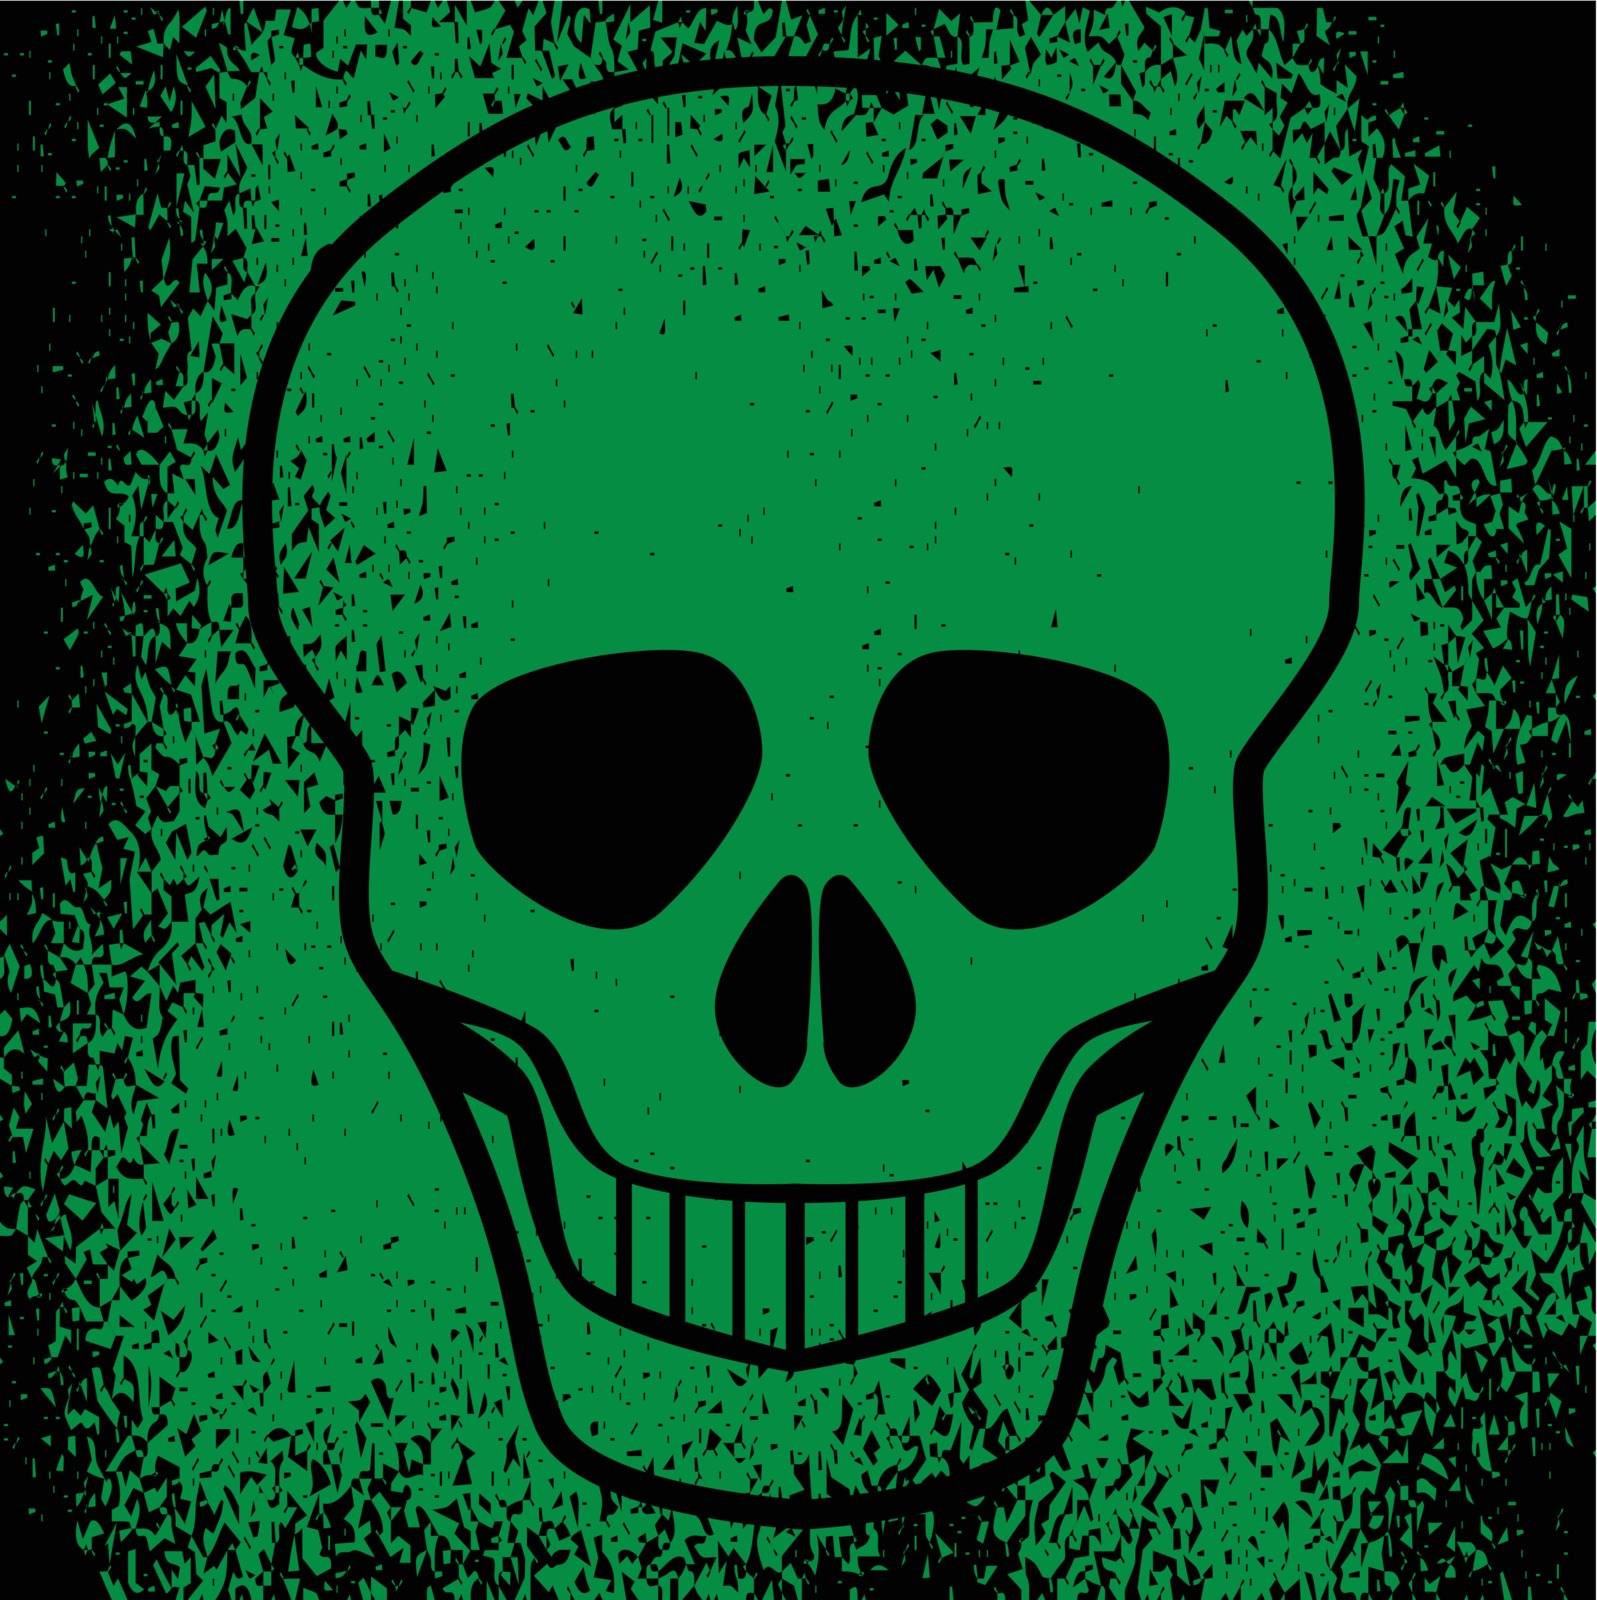 A human skull in grunge effect over a green background